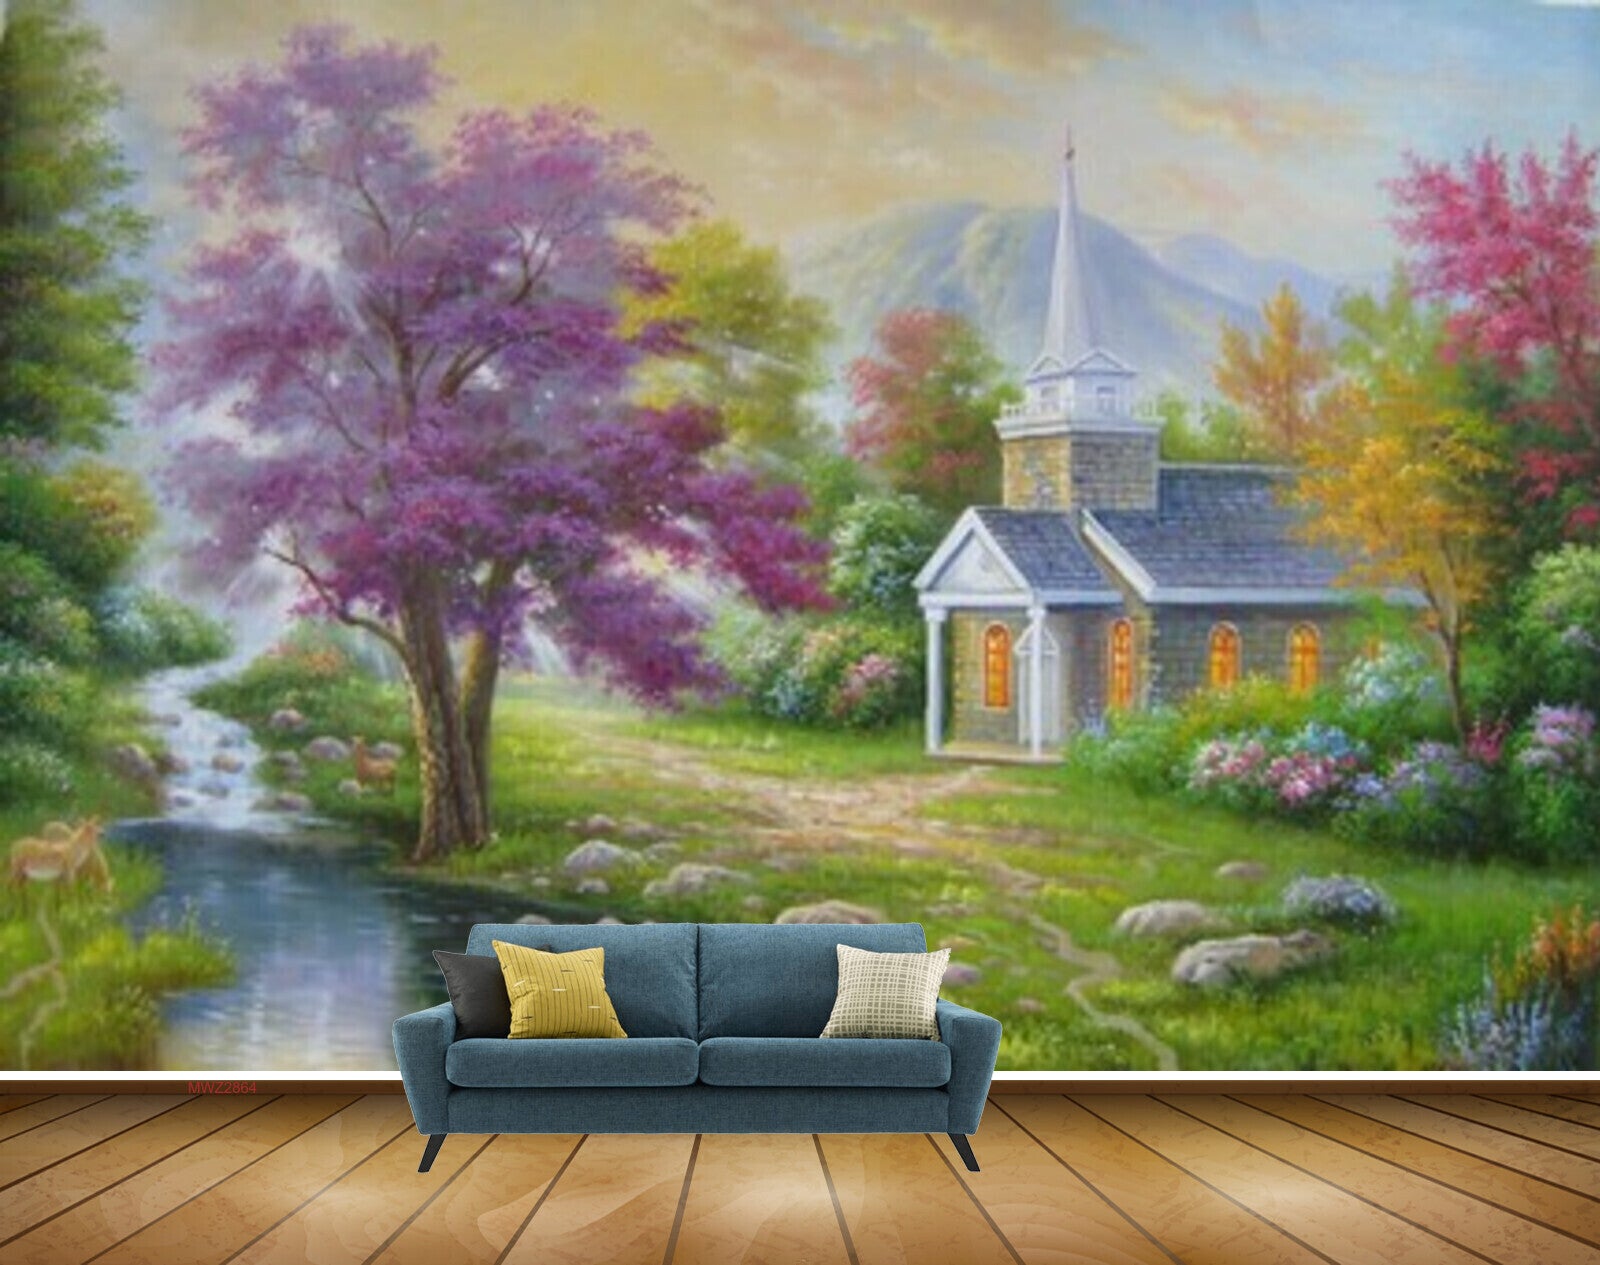 Avikalp MWZ2864 Sky Trees Houses Grass Stones Pink Yellow Leaves Mounatins River Pond Water Painting HD Wallpaper